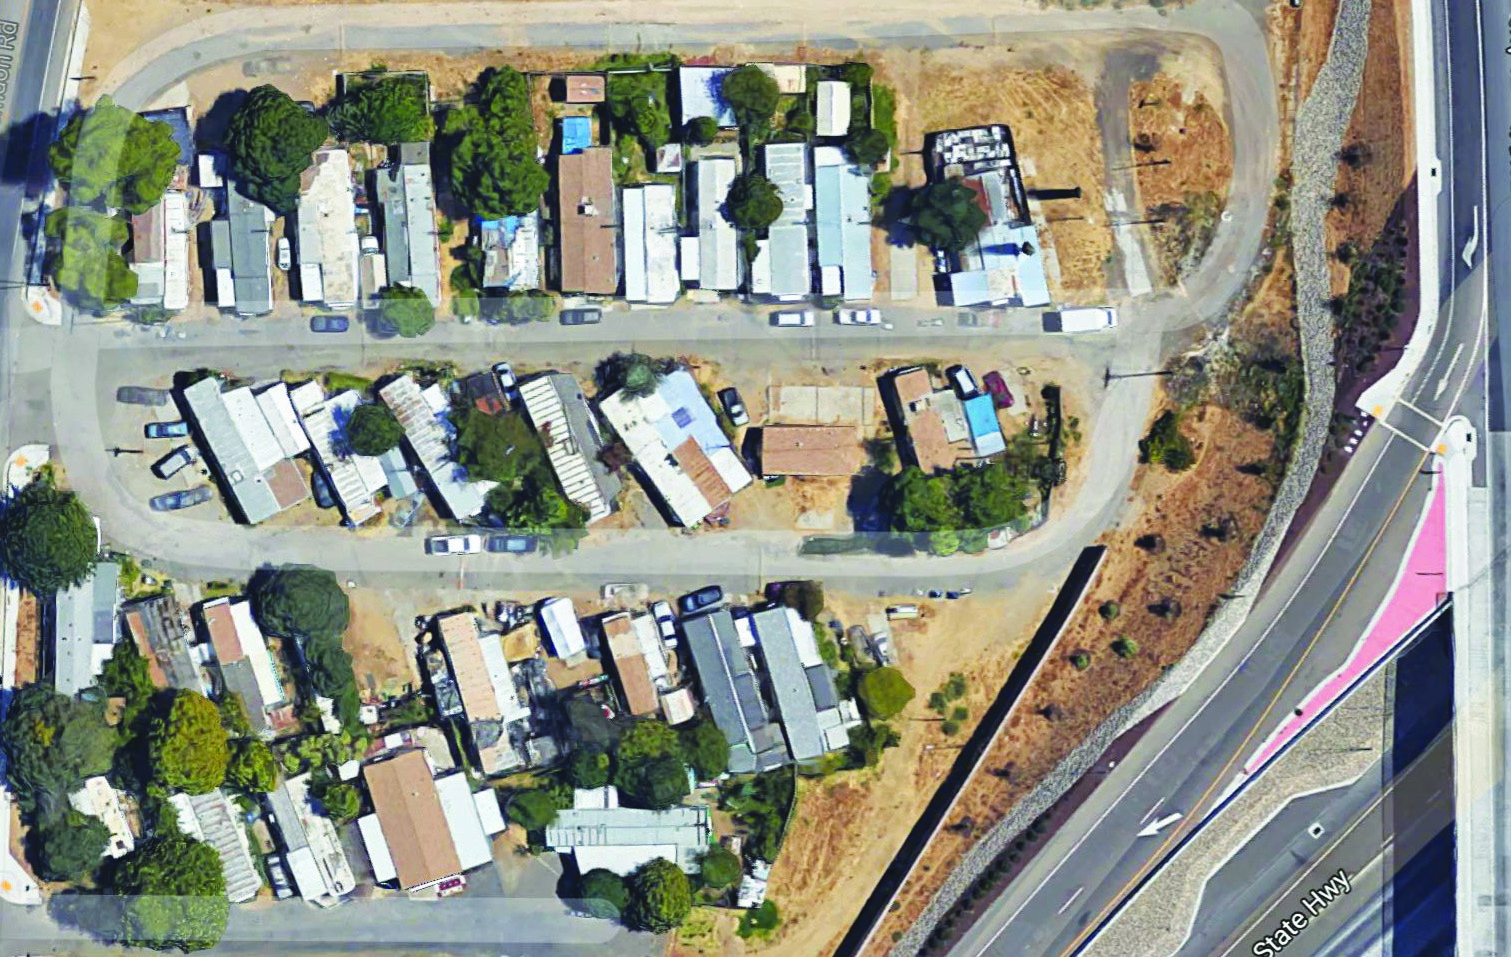 Figure 3 is an aerial view photograph showing the 30 mobile homes remaining at the mobile home park.